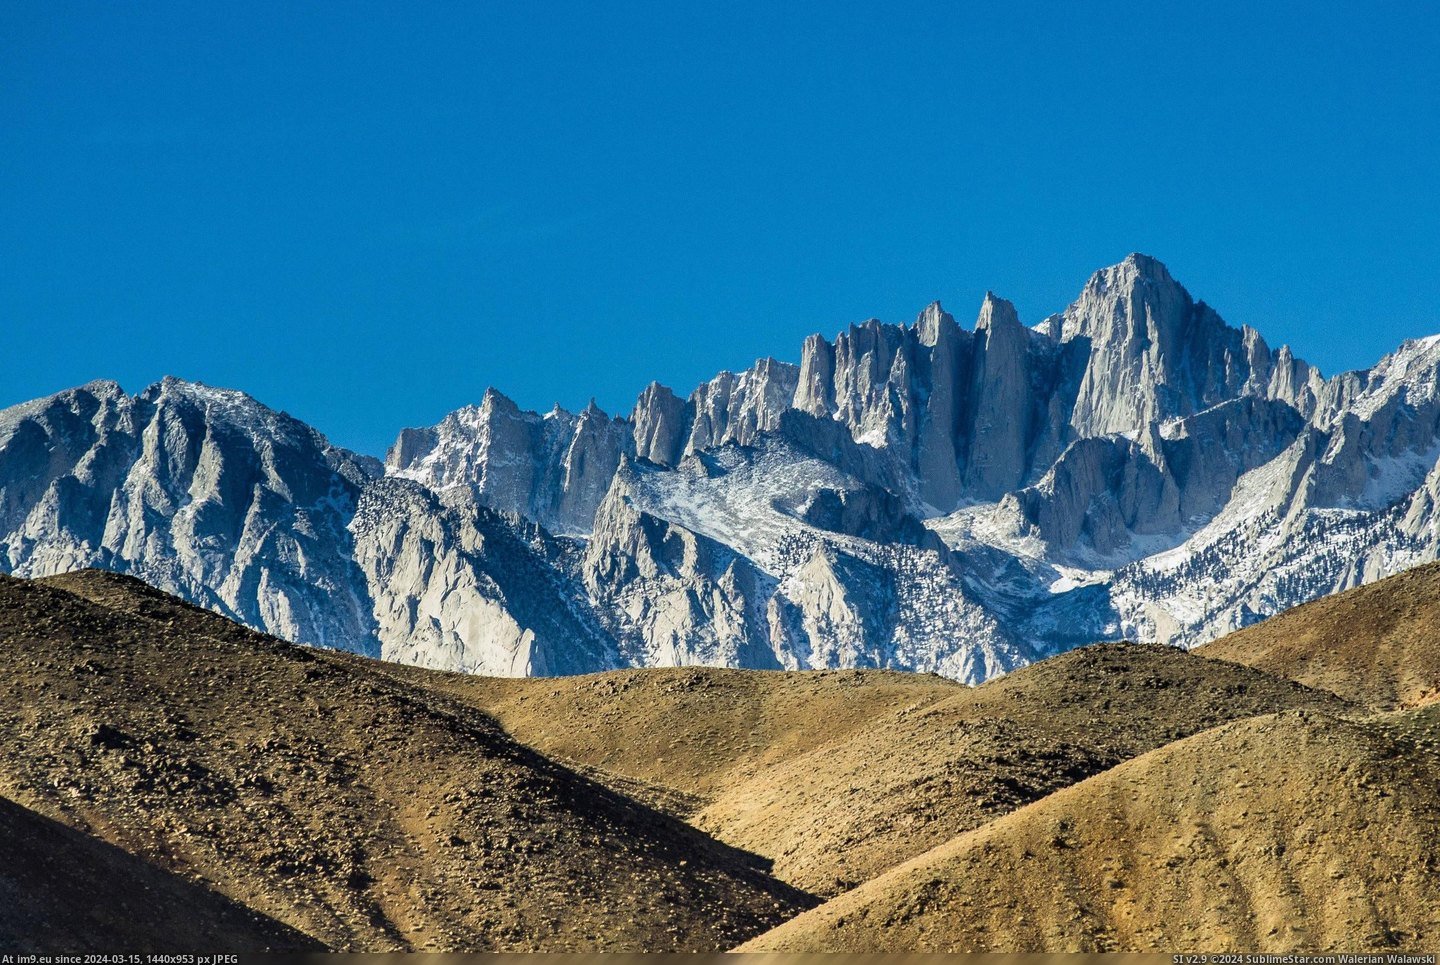 #States #Mount #Whitney #Elevation #Point #Highest [Earthporn] Mount Whitney, CA - Elevation 14,505, Prominence 10,079 - The highest point in the lower 48 states [2429x1619] Pic. (Изображение из альбом My r/EARTHPORN favs))